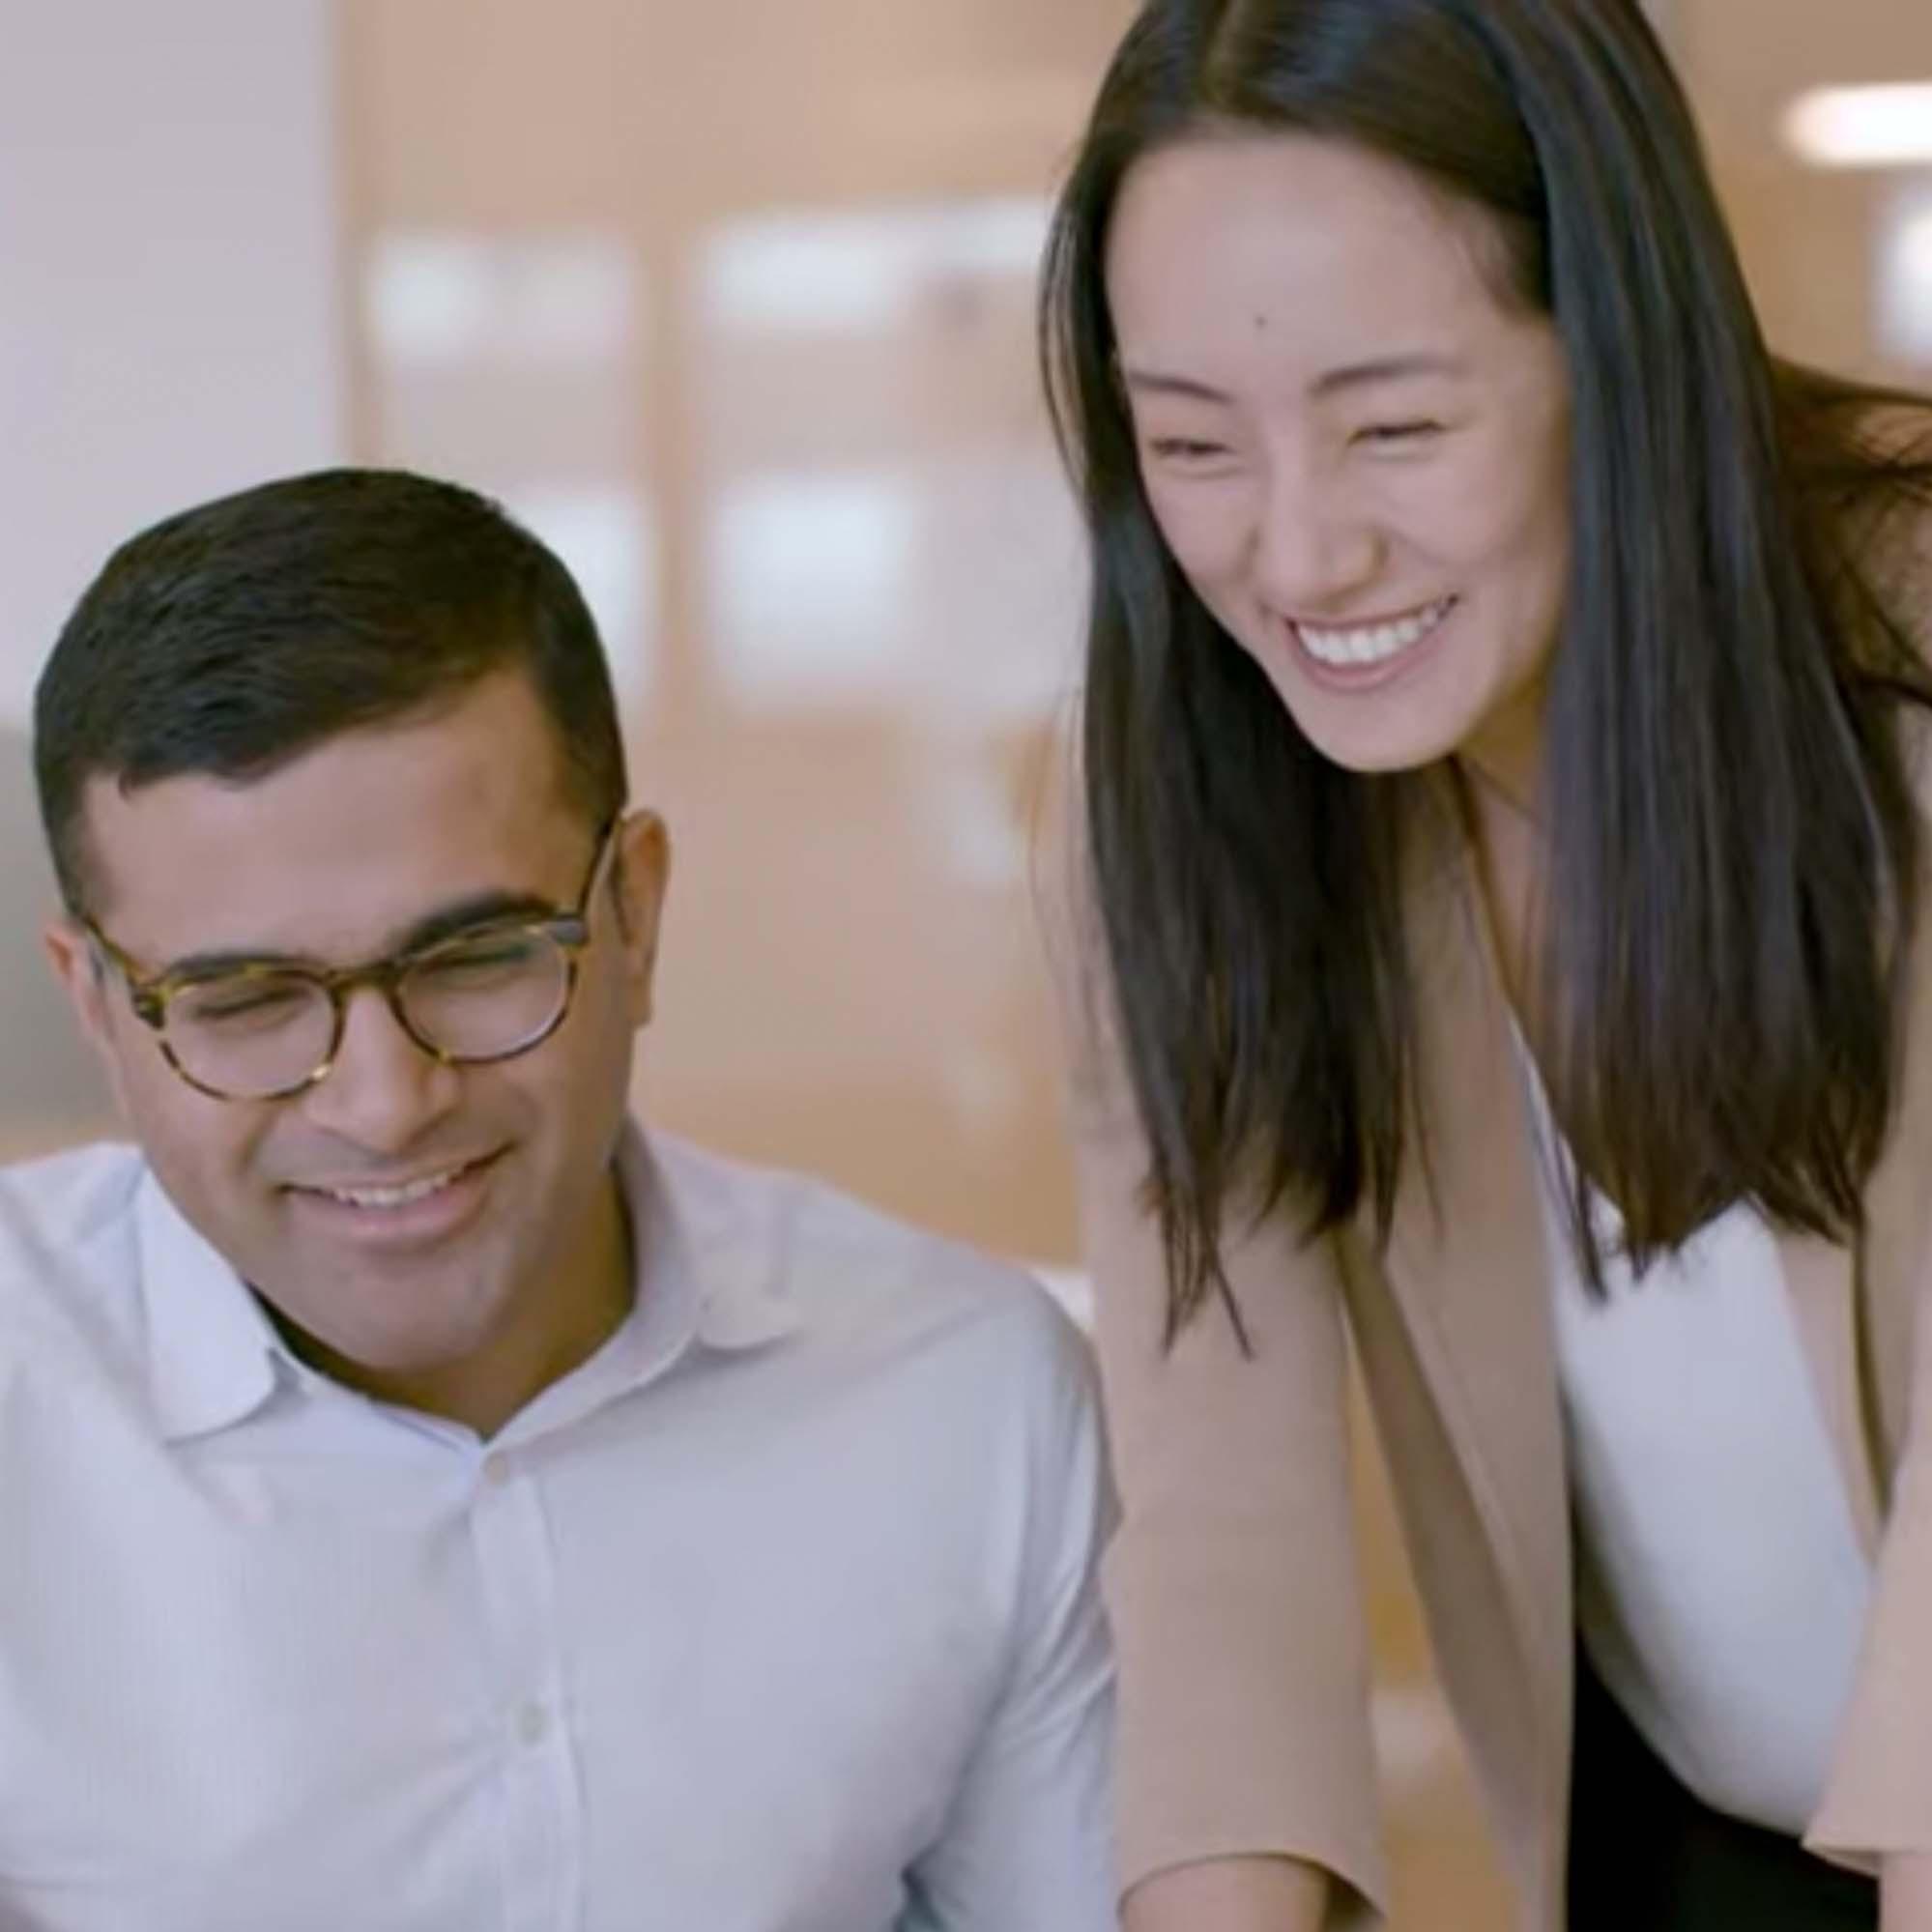 A man sitting down smiling with a smiling female colleague standing next to him